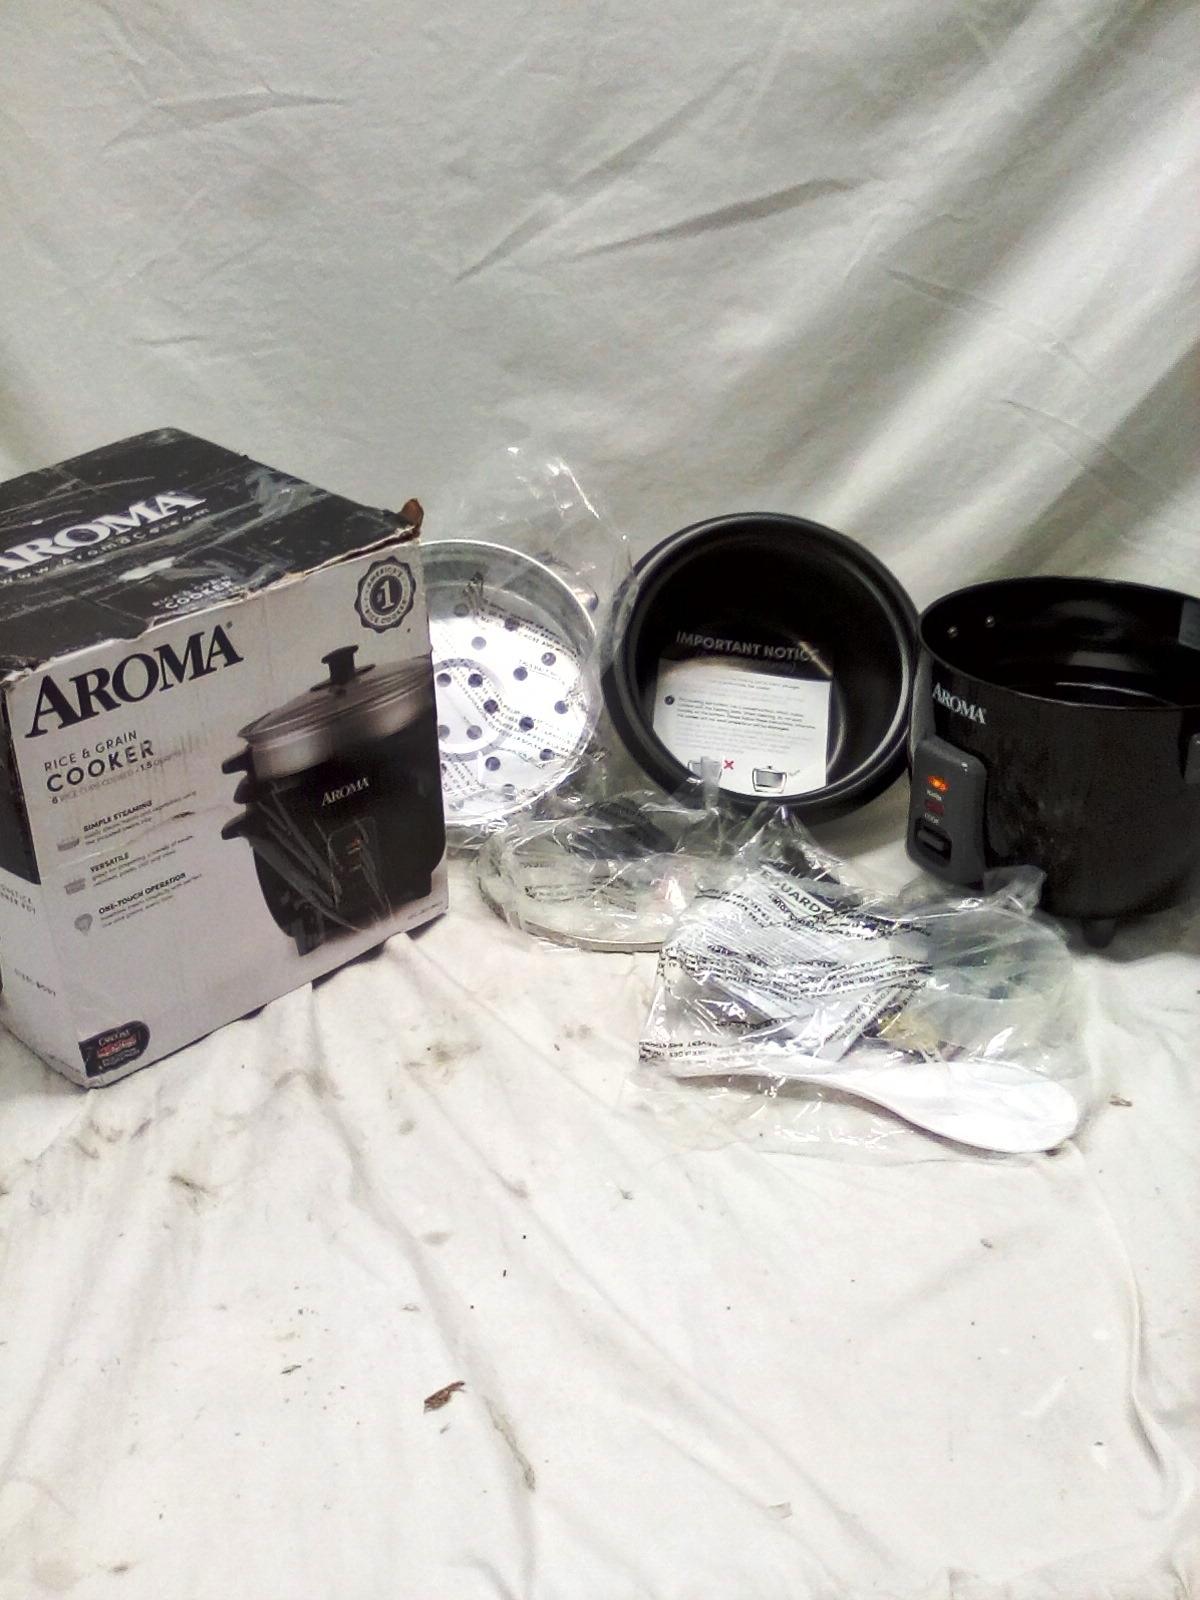 Aroma Rice and Grain Cooker 6 Cup Capacity (Tested)